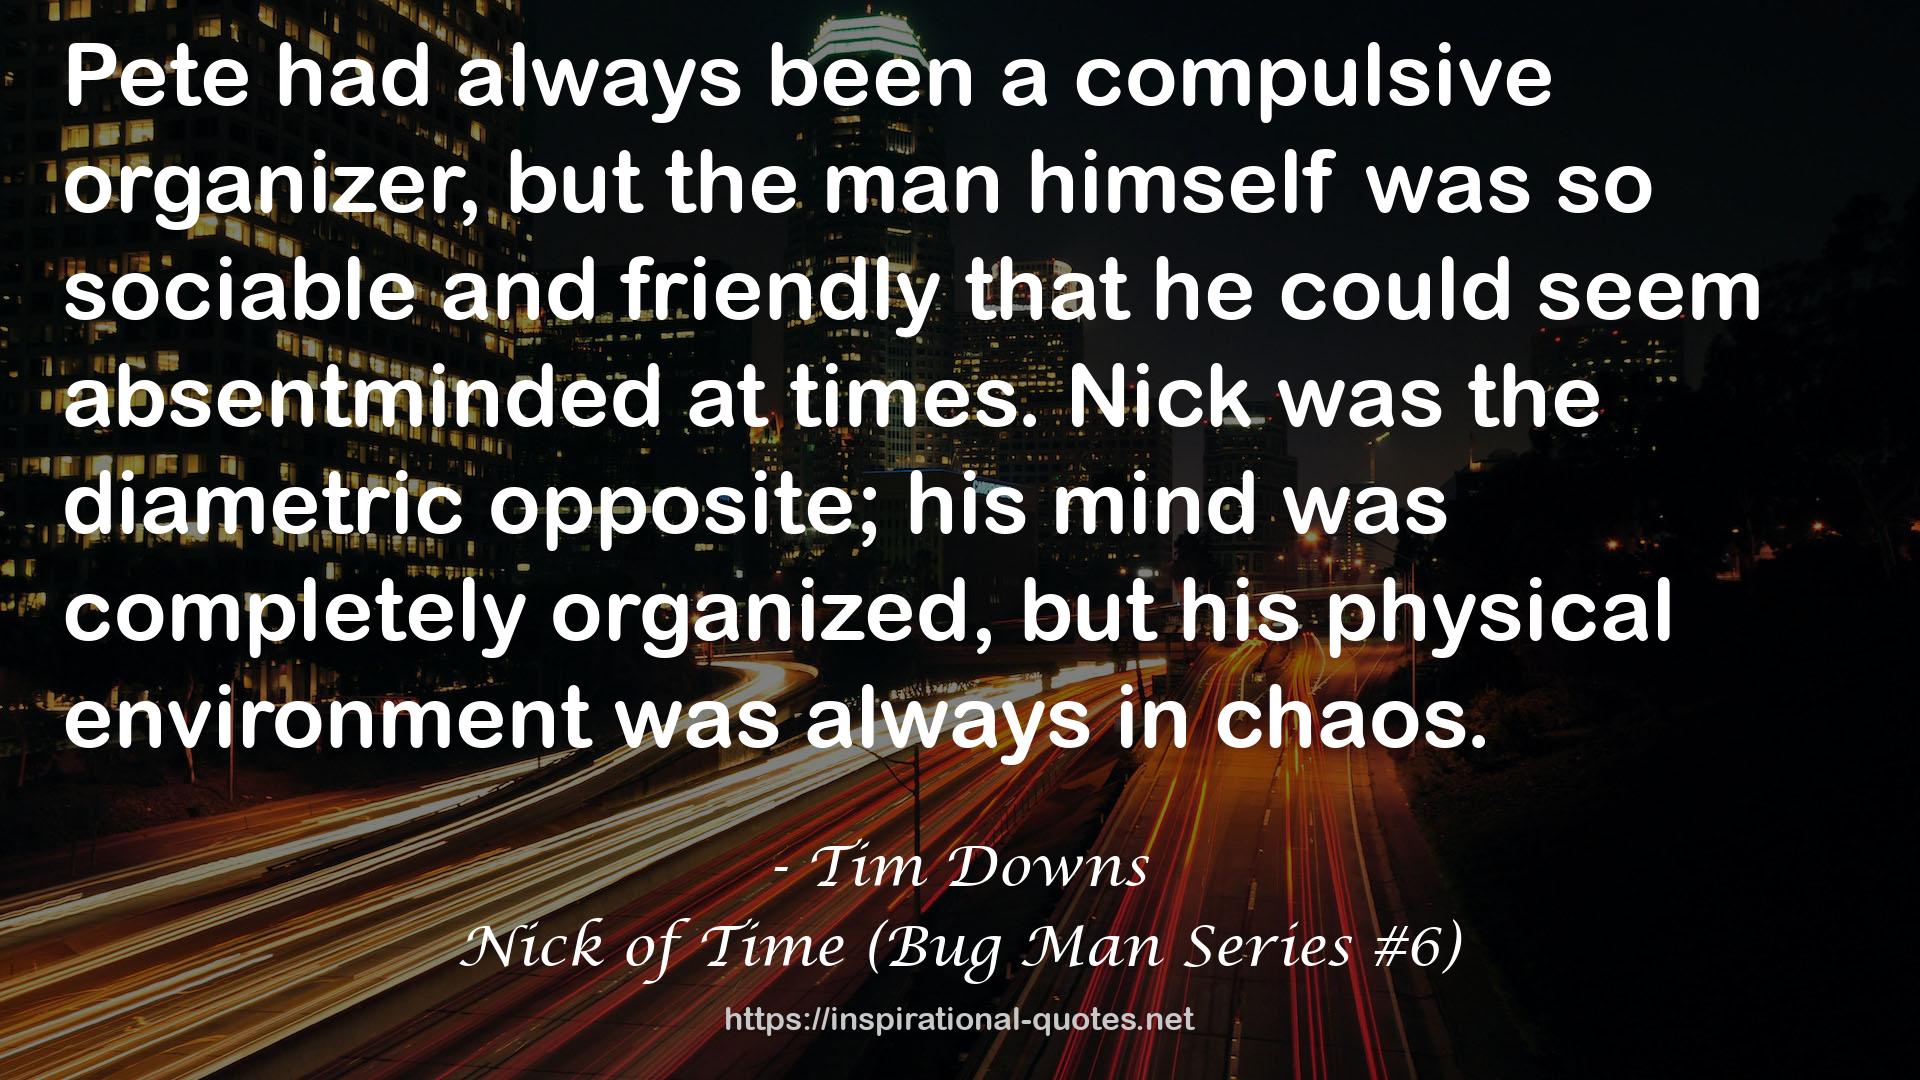 Nick of Time (Bug Man Series #6) QUOTES